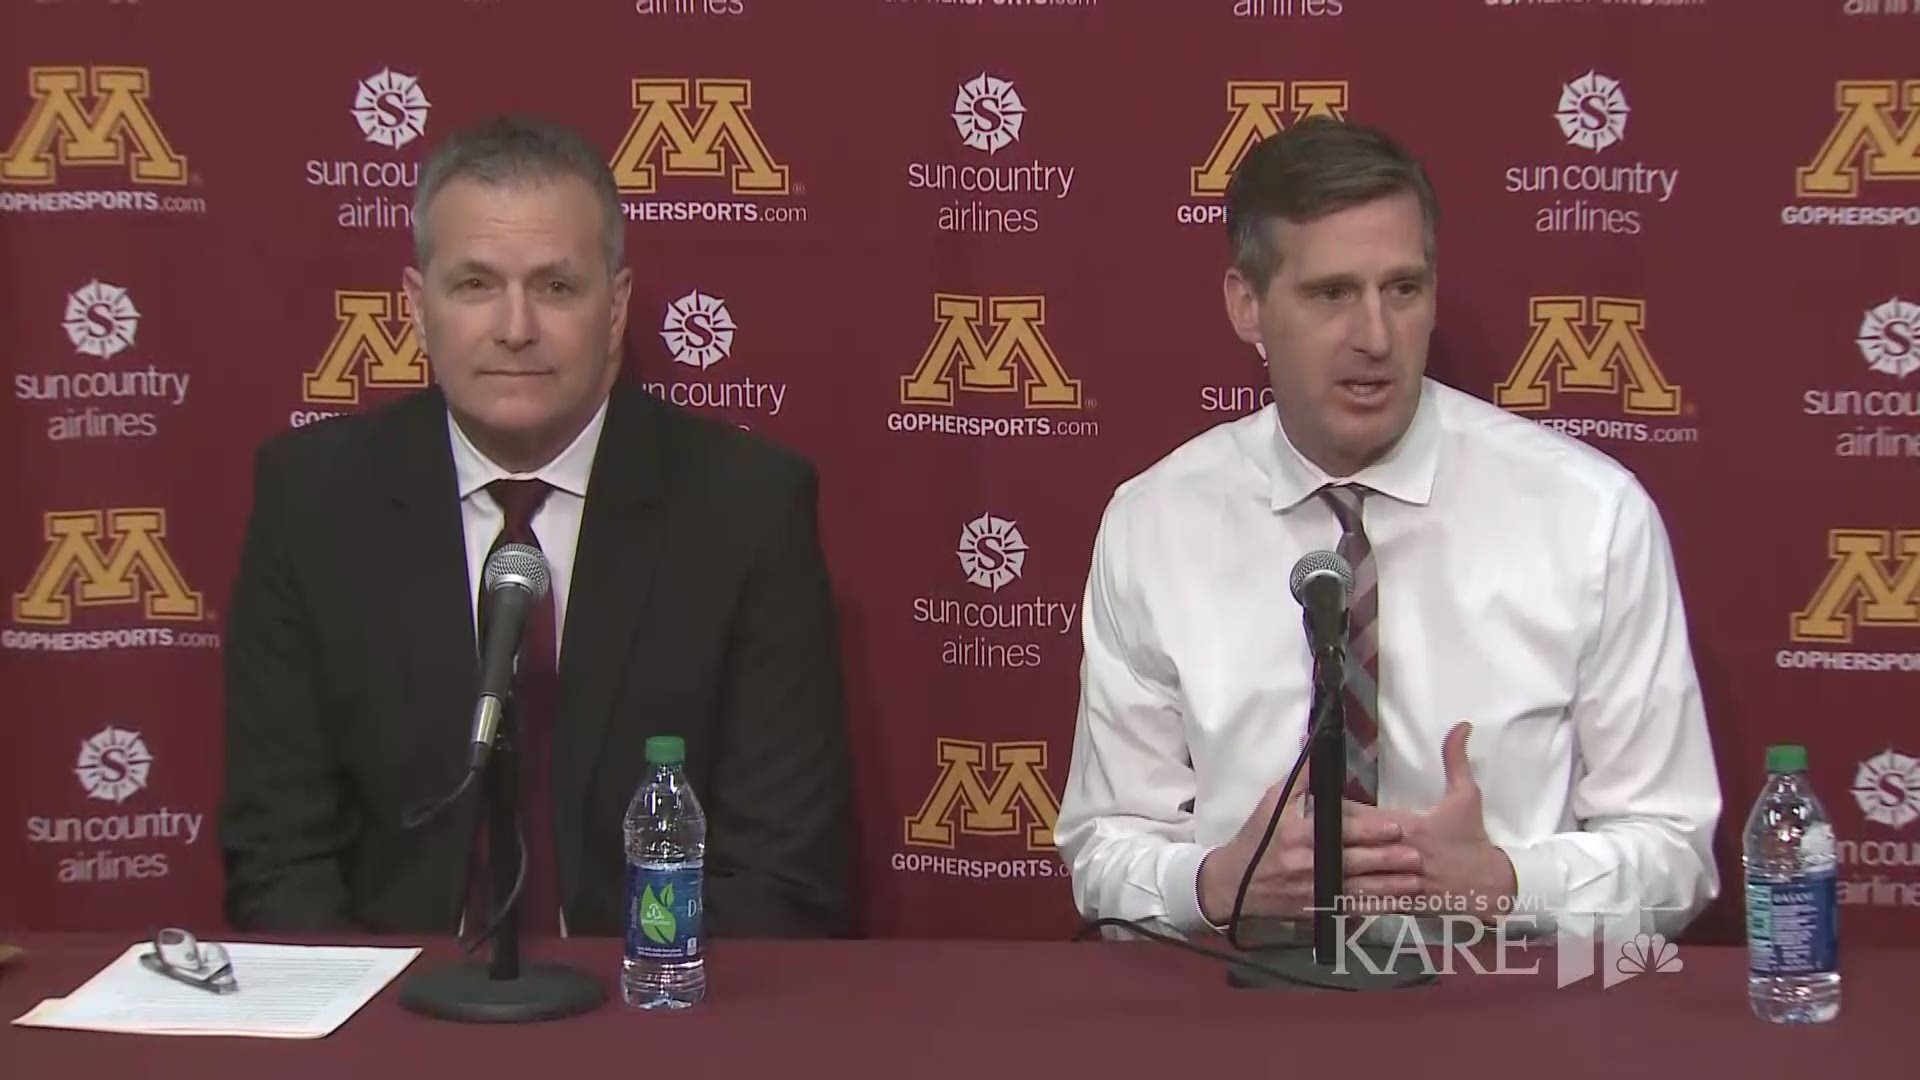 After nearly two decades at the helm of the Minnesota Gopher men's hockey team, Don Lucia is out as head coach. http://kare11.tv/2HPPNAs